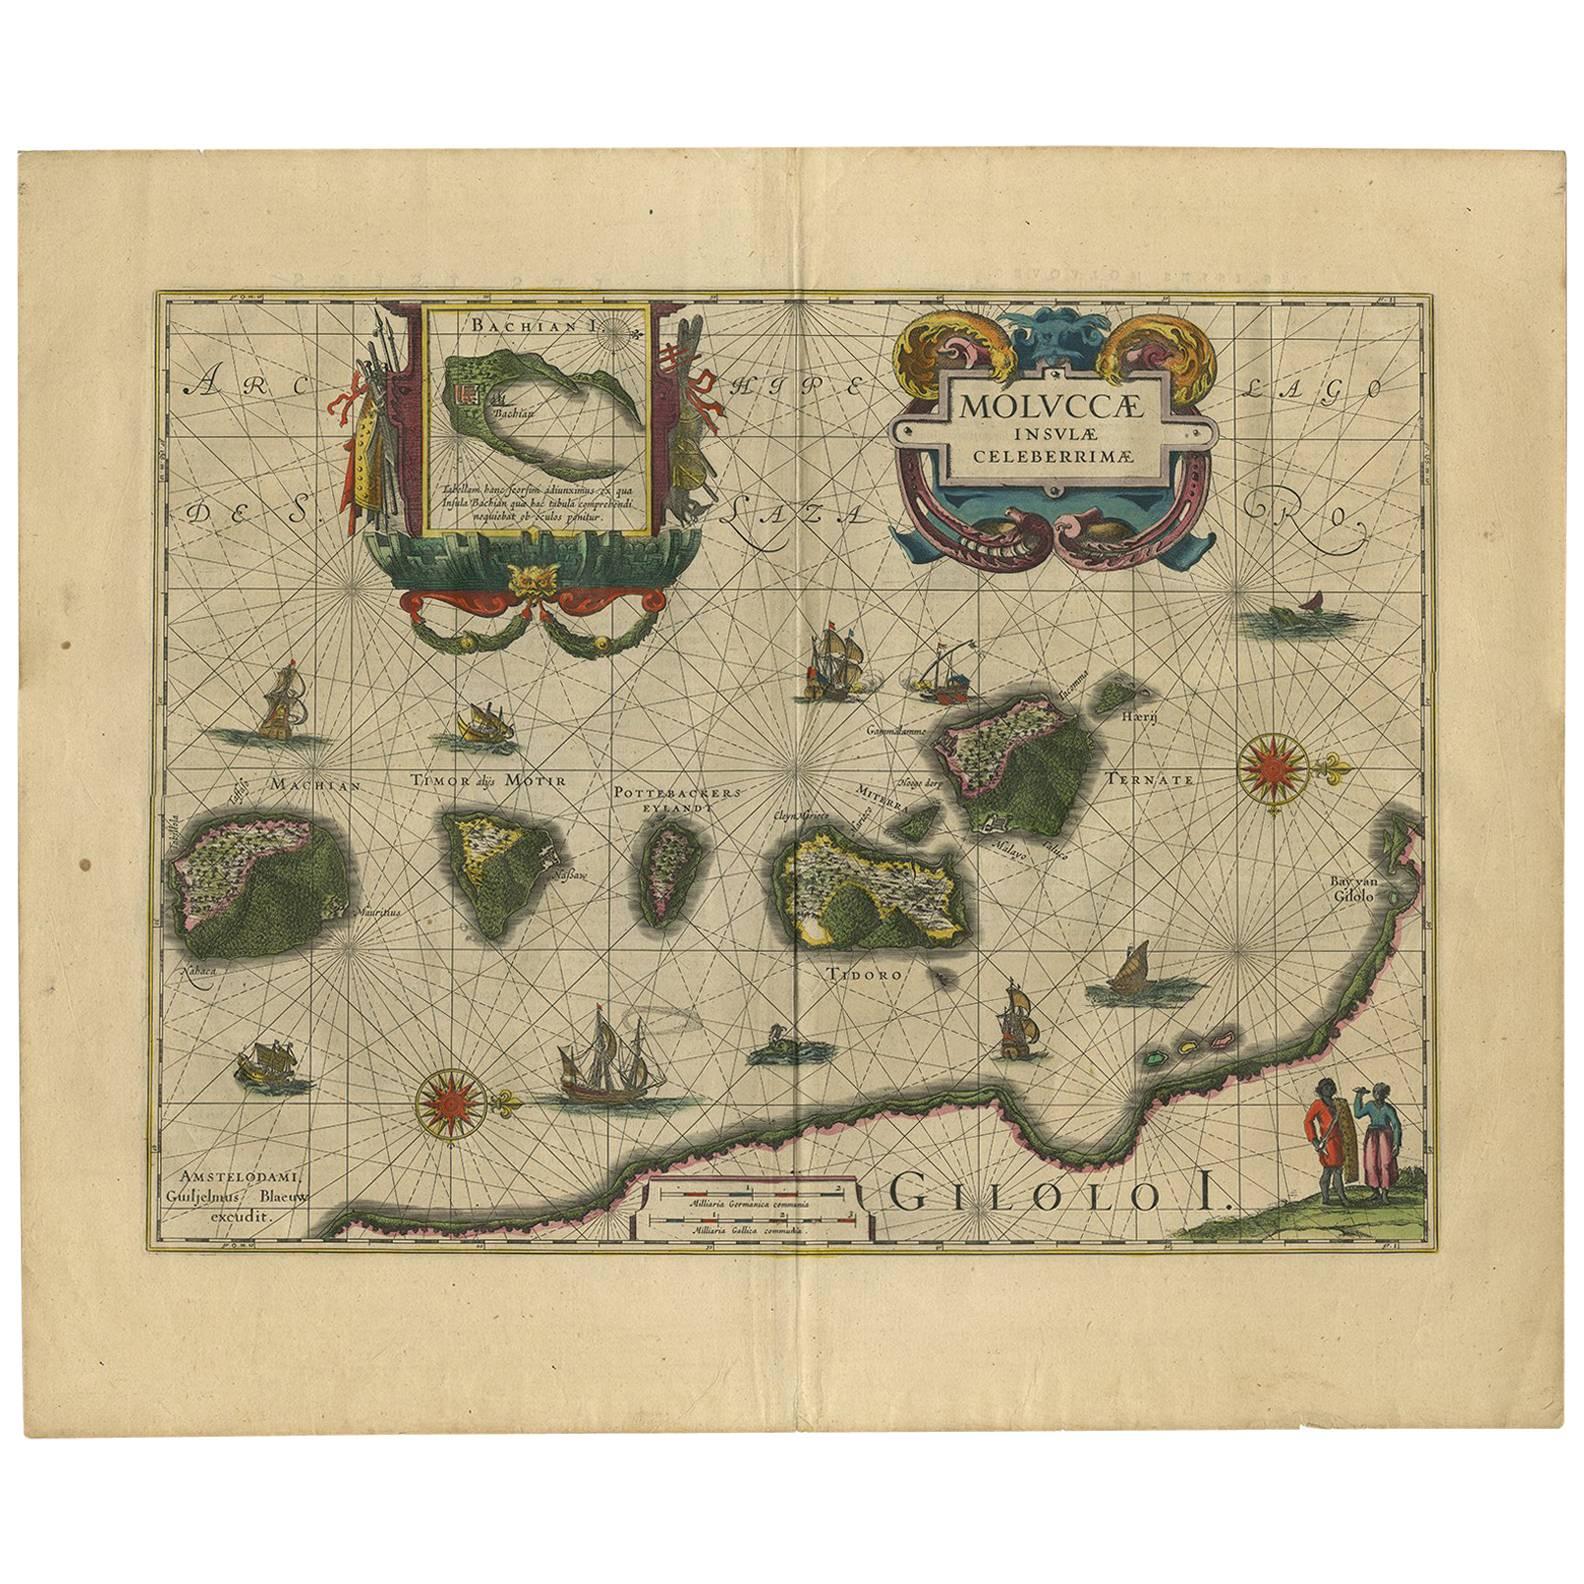 Antique Map of the Spice Islands 'Moluccas', Indonesia by W. Blaeu, circa 1640